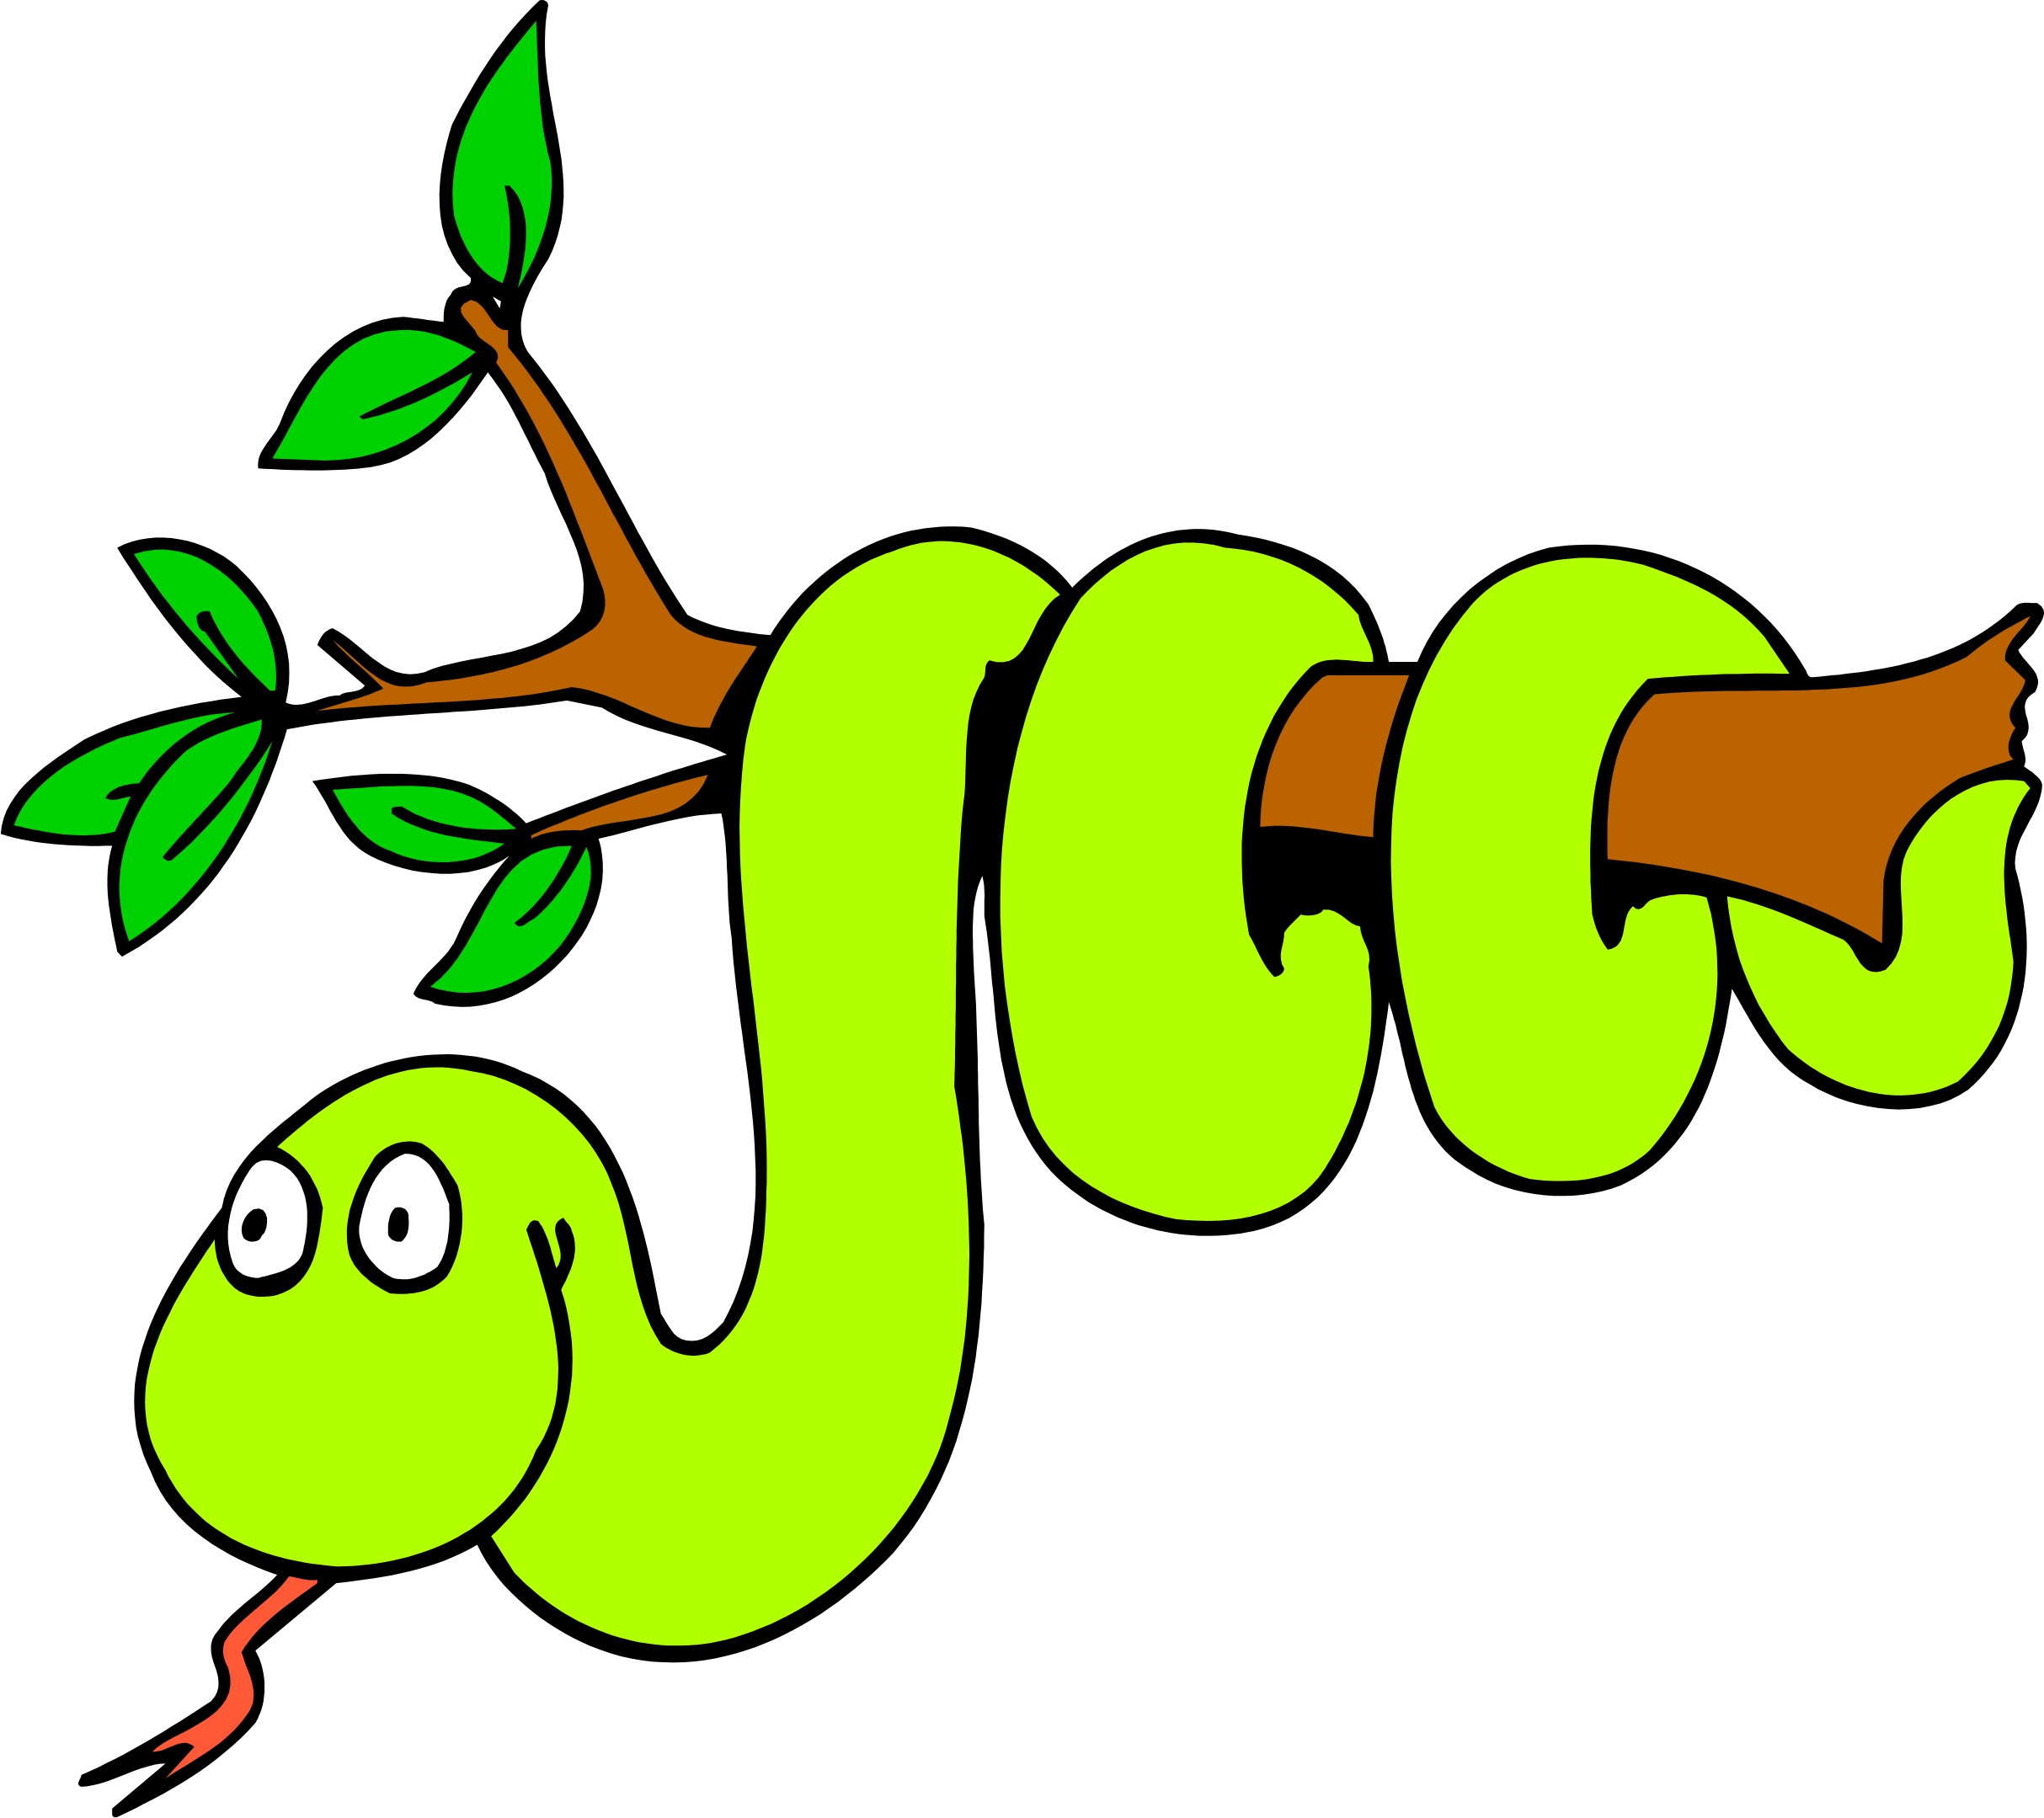 Long Snake Cartoon - Clipart library - Clipart library